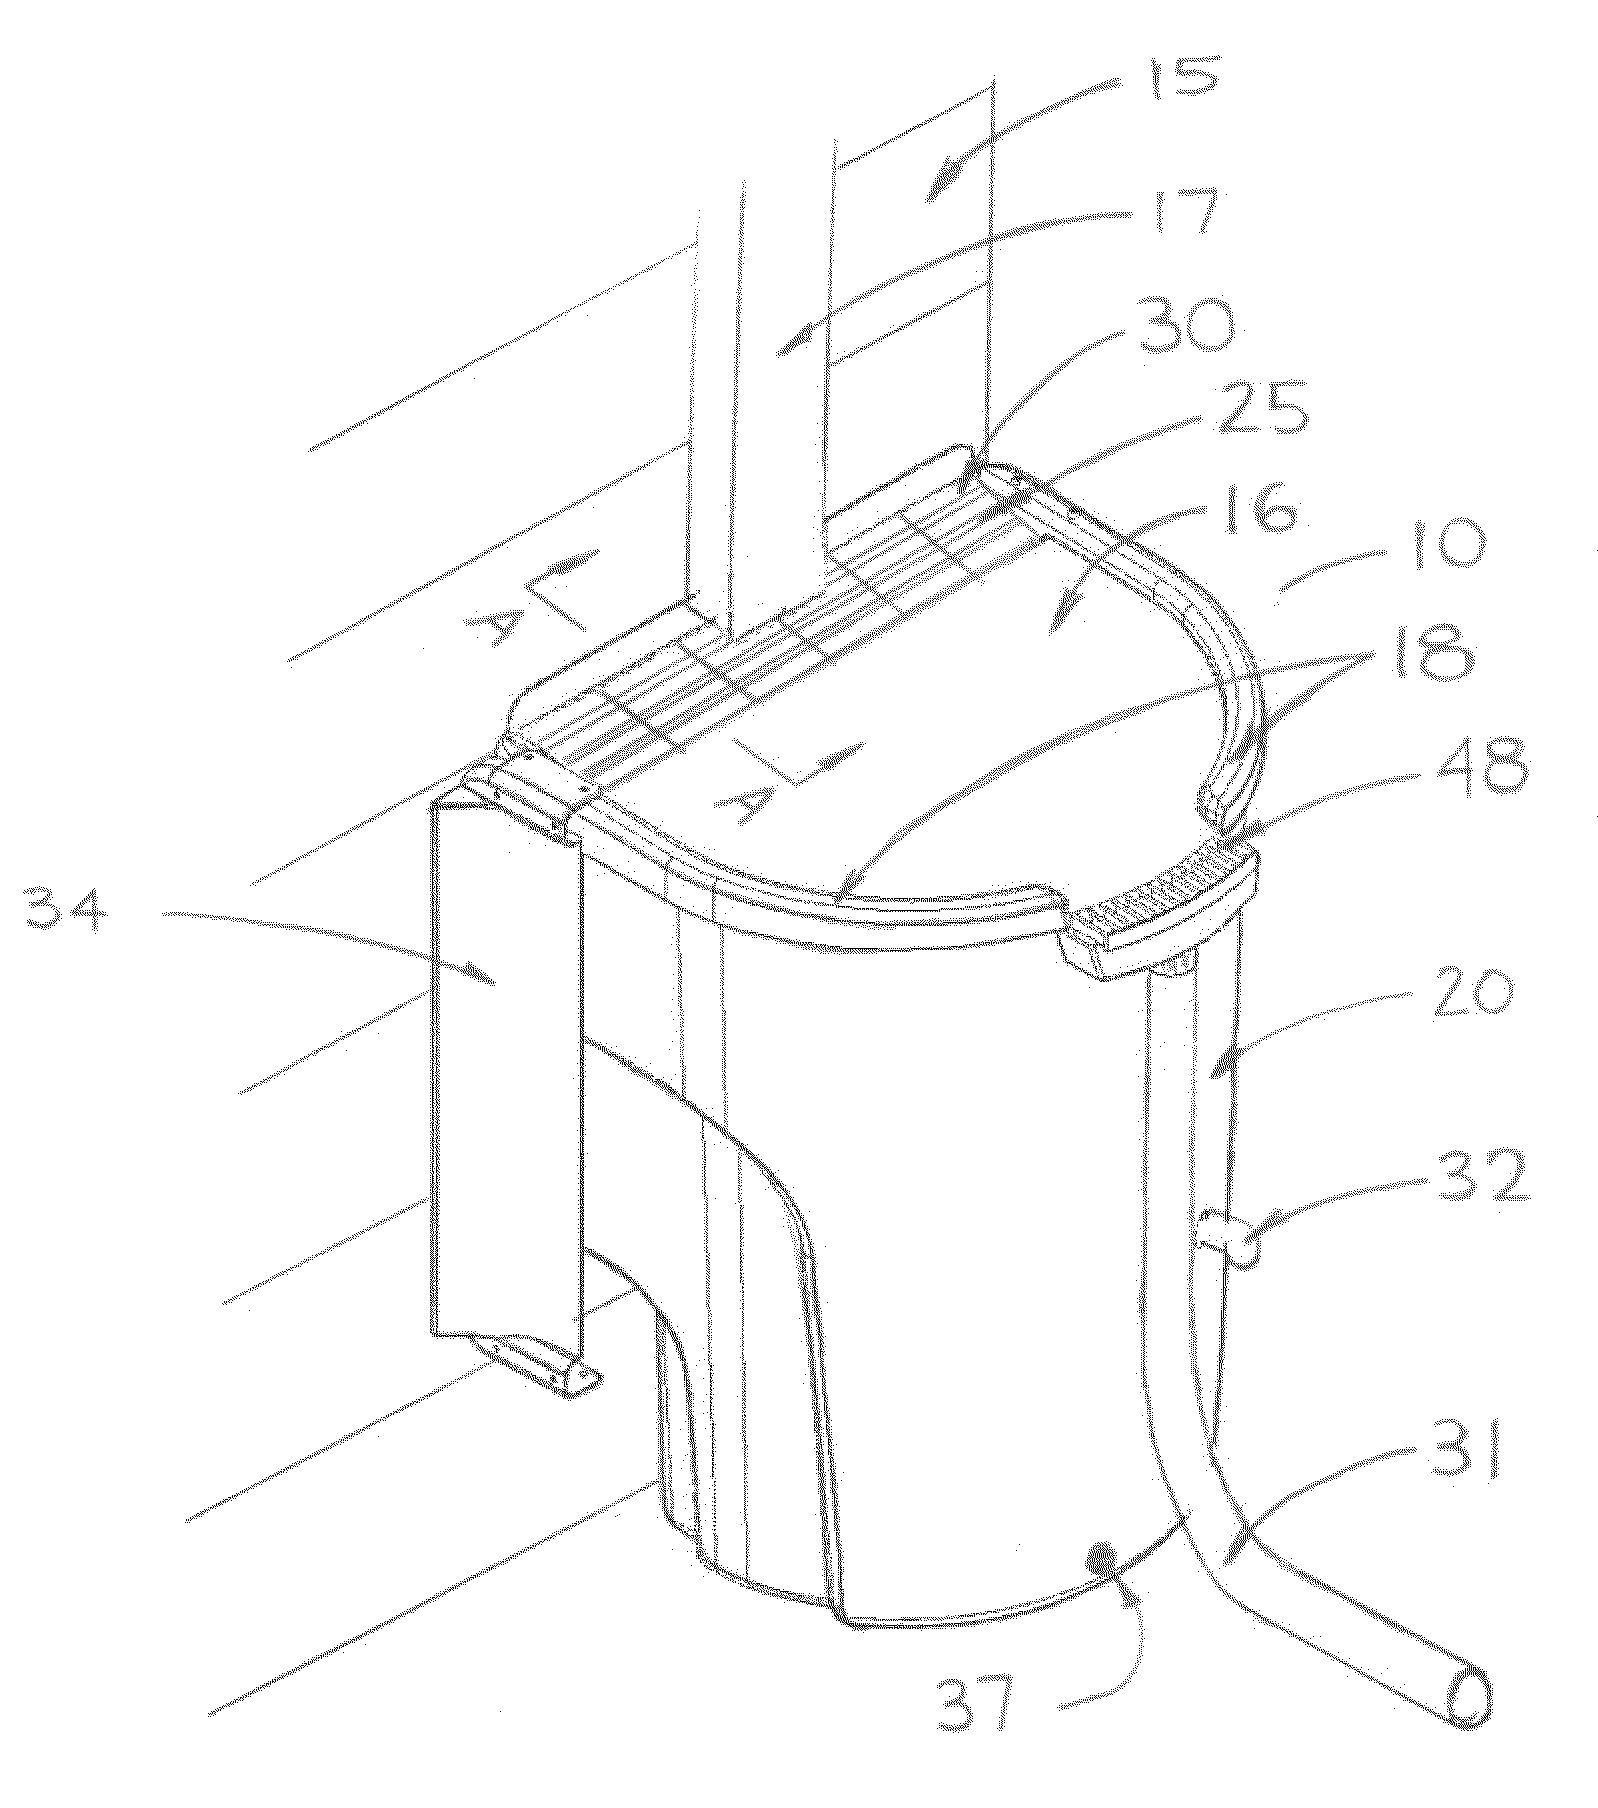 Water harvesting device